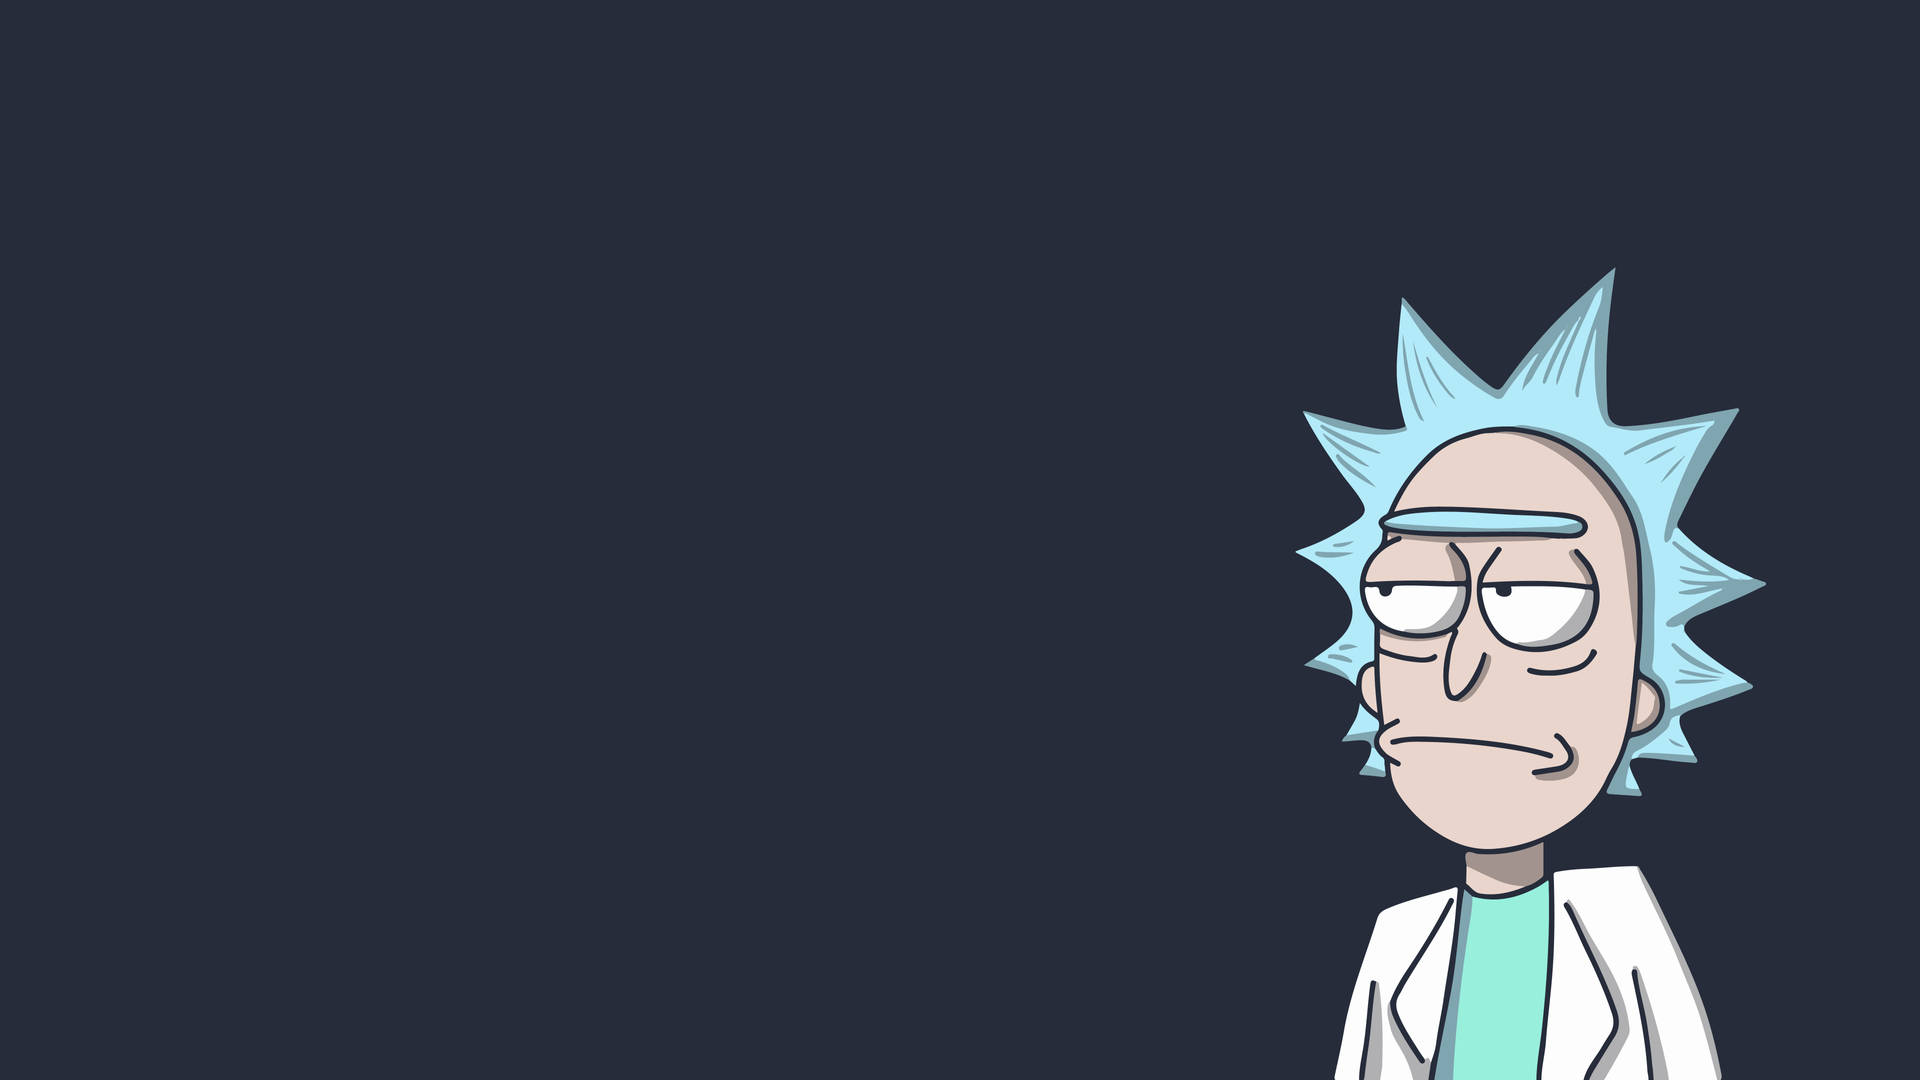 Bored Rick And Morty Pc 4k